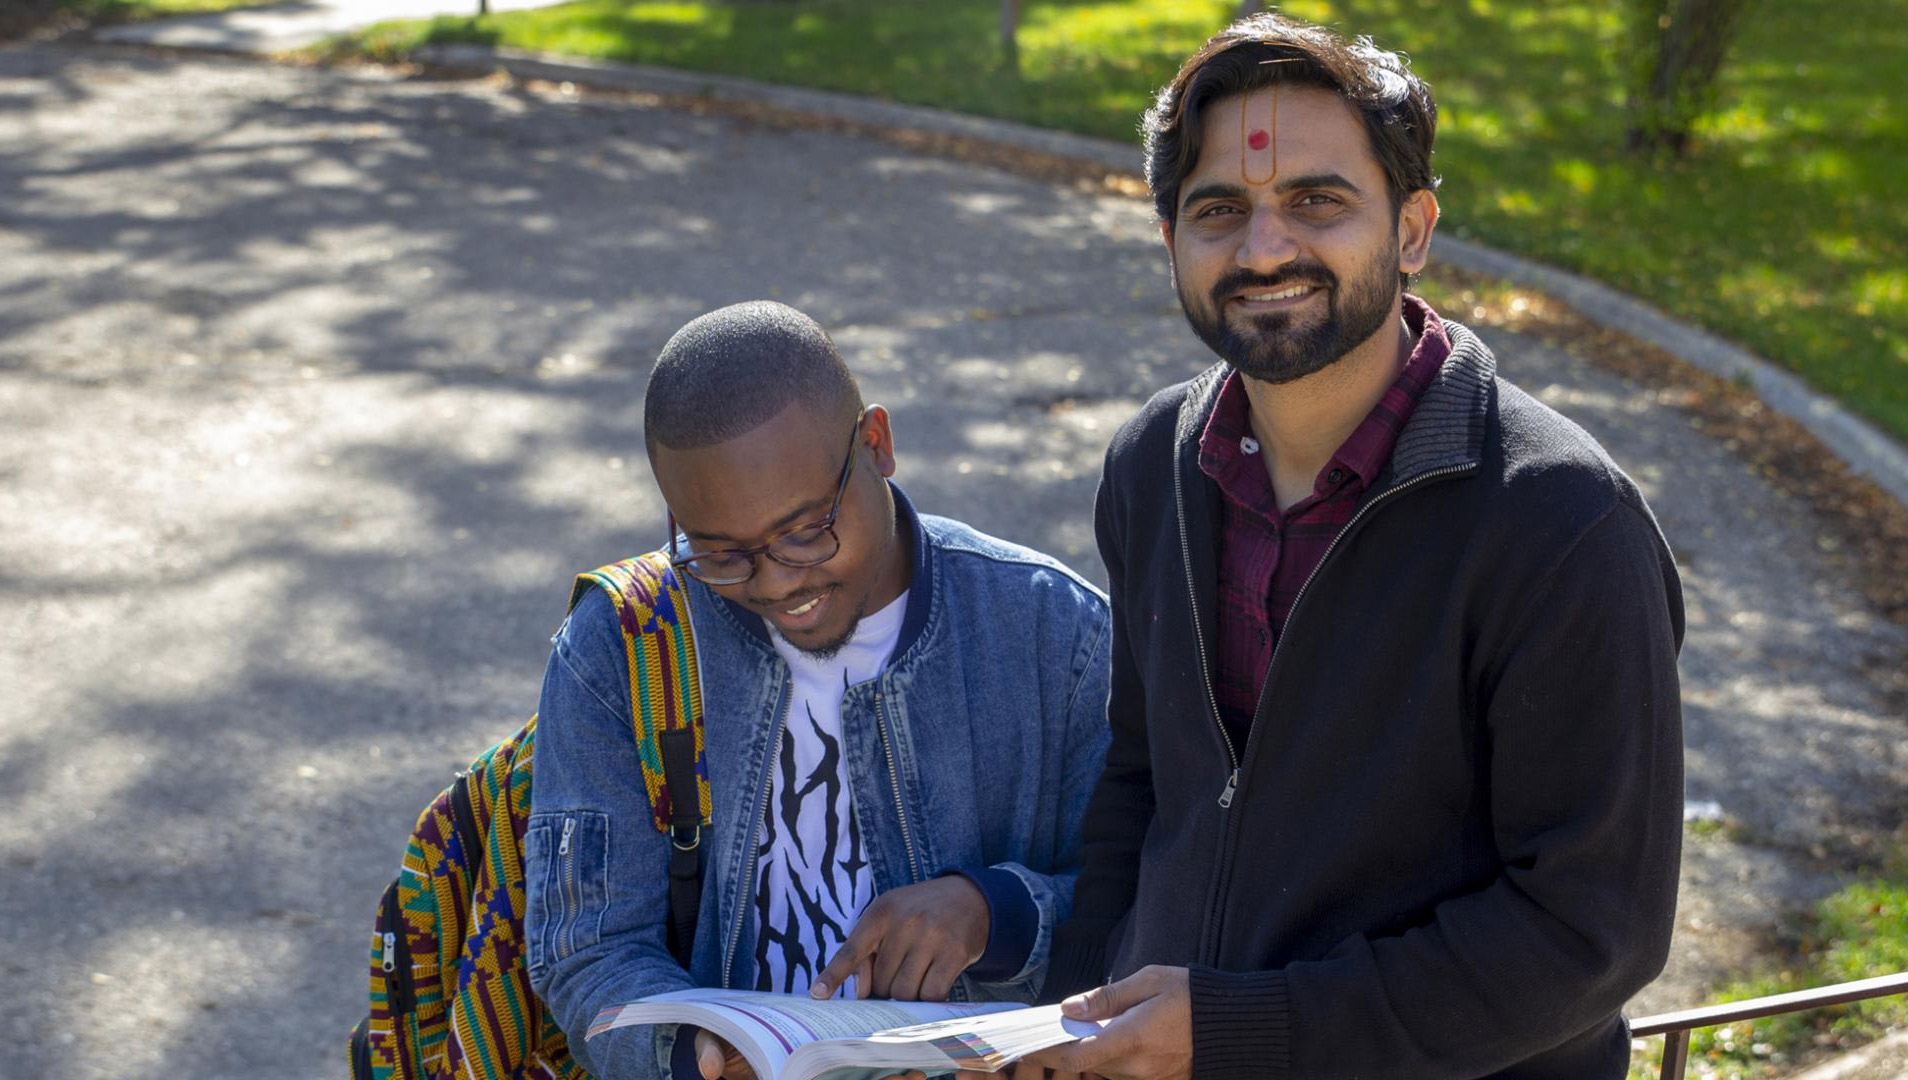 Two male students standing outdoors with a green lawn full of fallen leaves behind them, looking at a textbook.